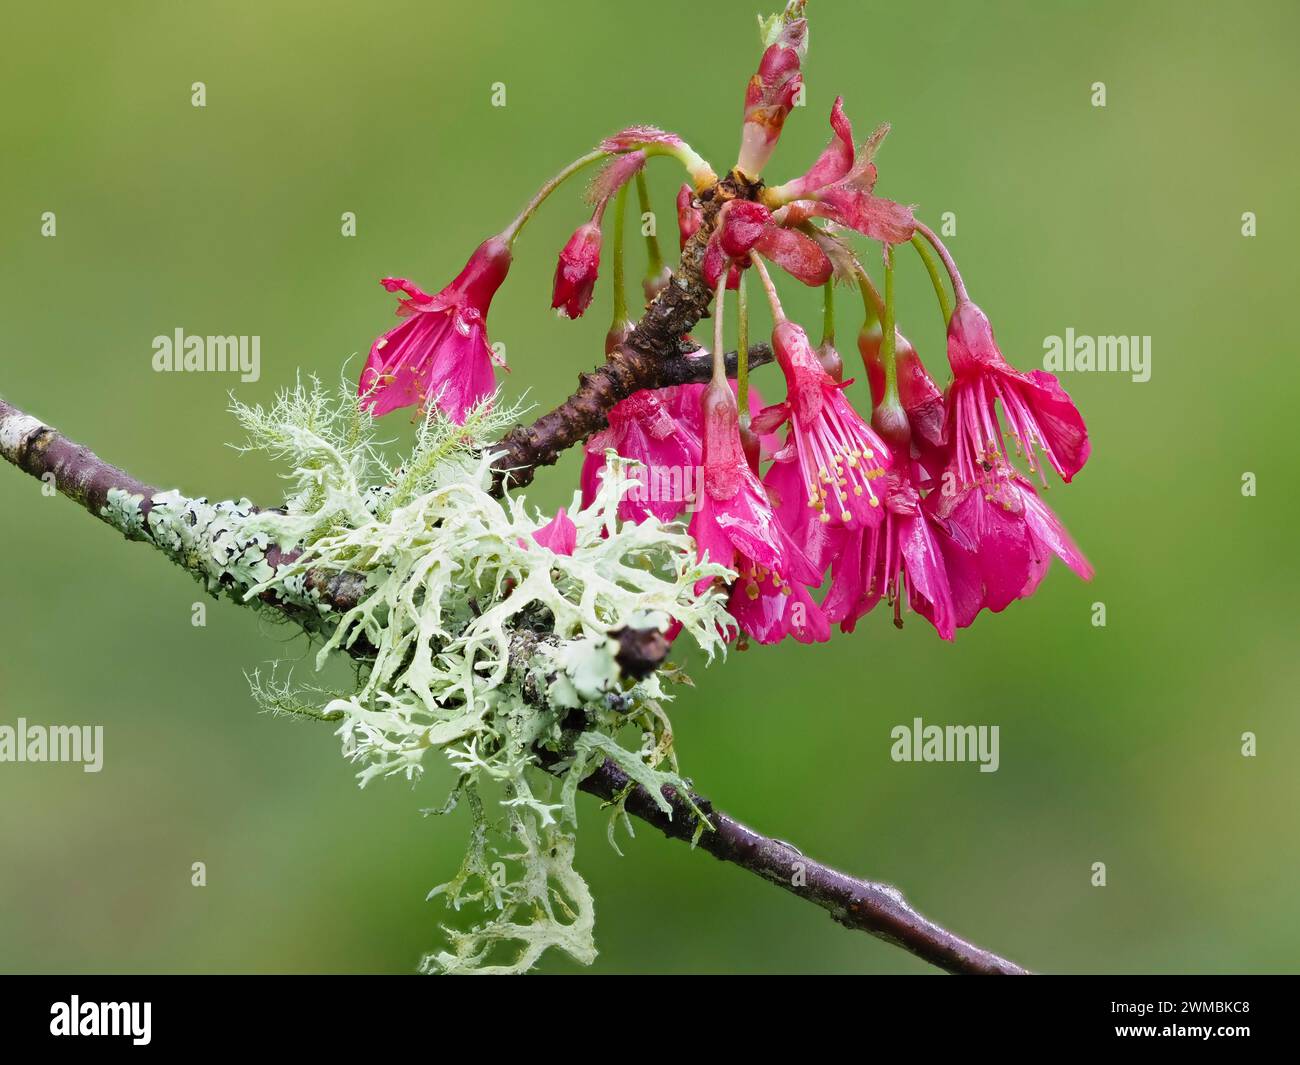 Red flowers of the early spring flowering cherry, Prunus campanulata 'Felix Jury', contrat with the fruticose lichen, Ramalina farinacea Stock Photo